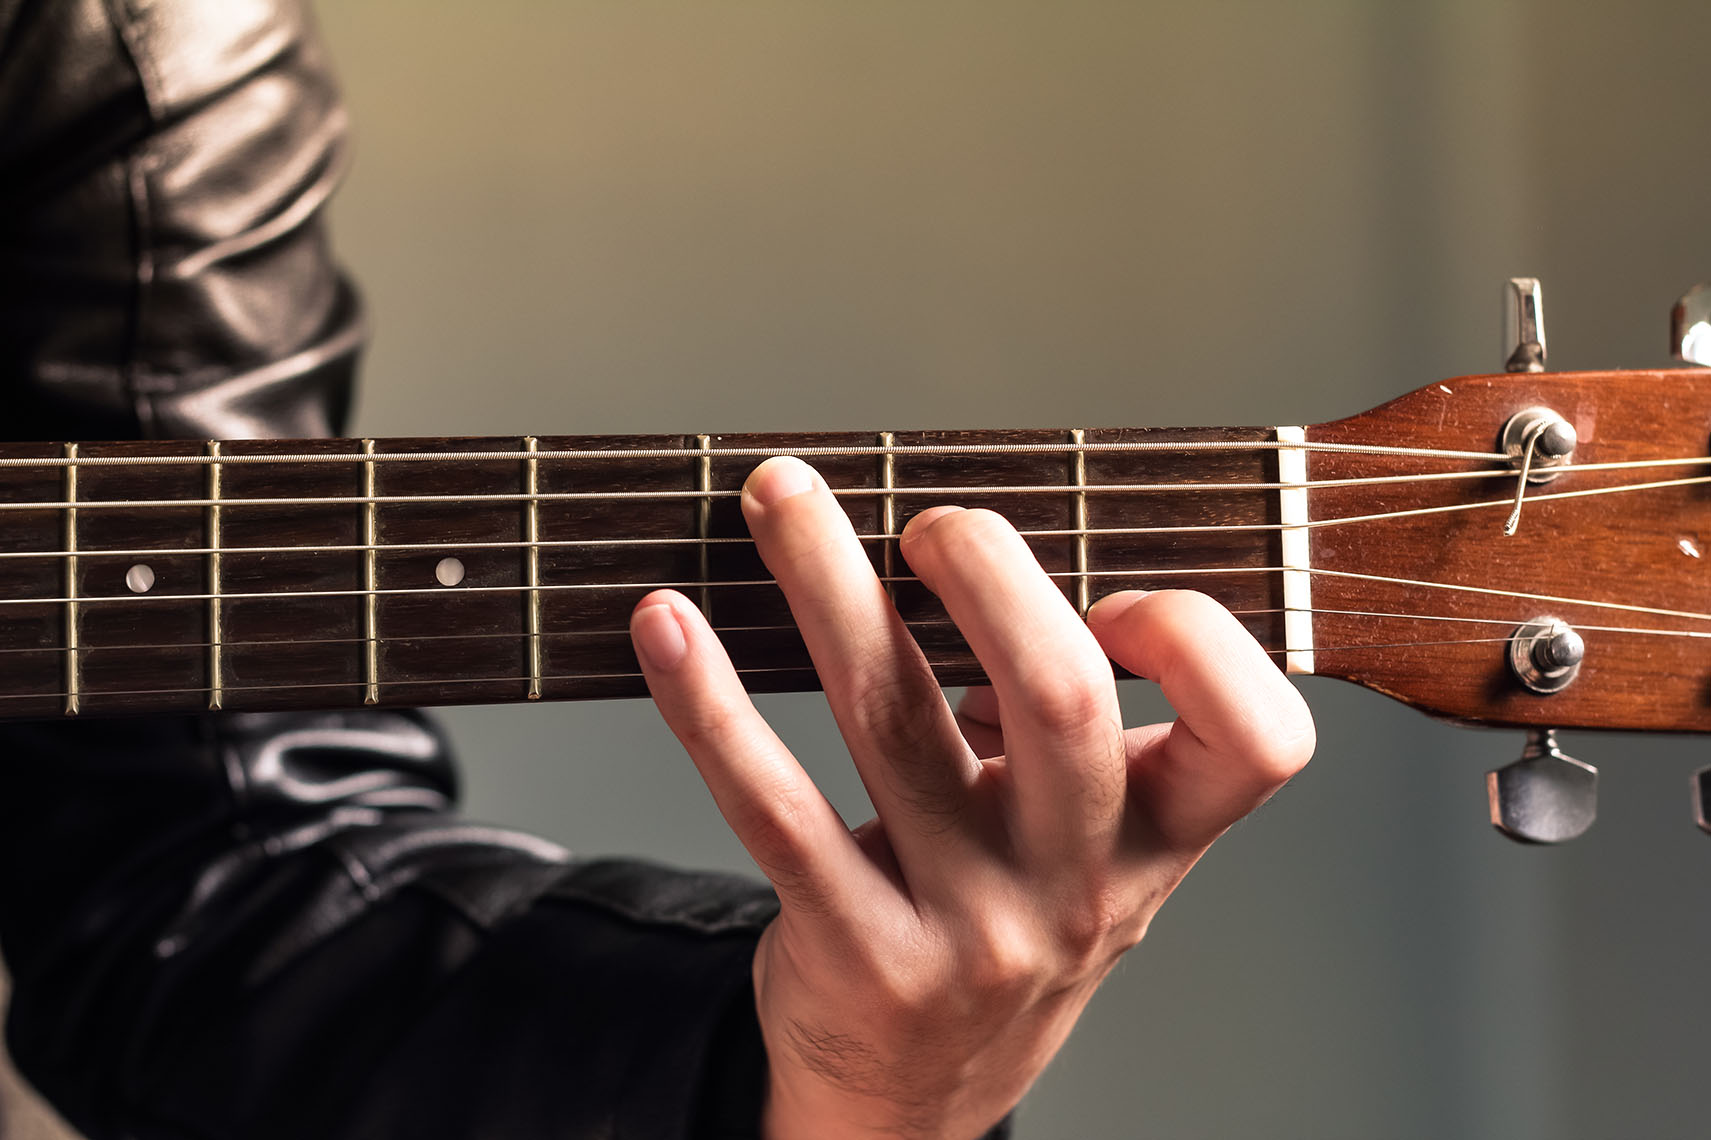 17 Easy Chord Progressions That All Guitarists Should Know